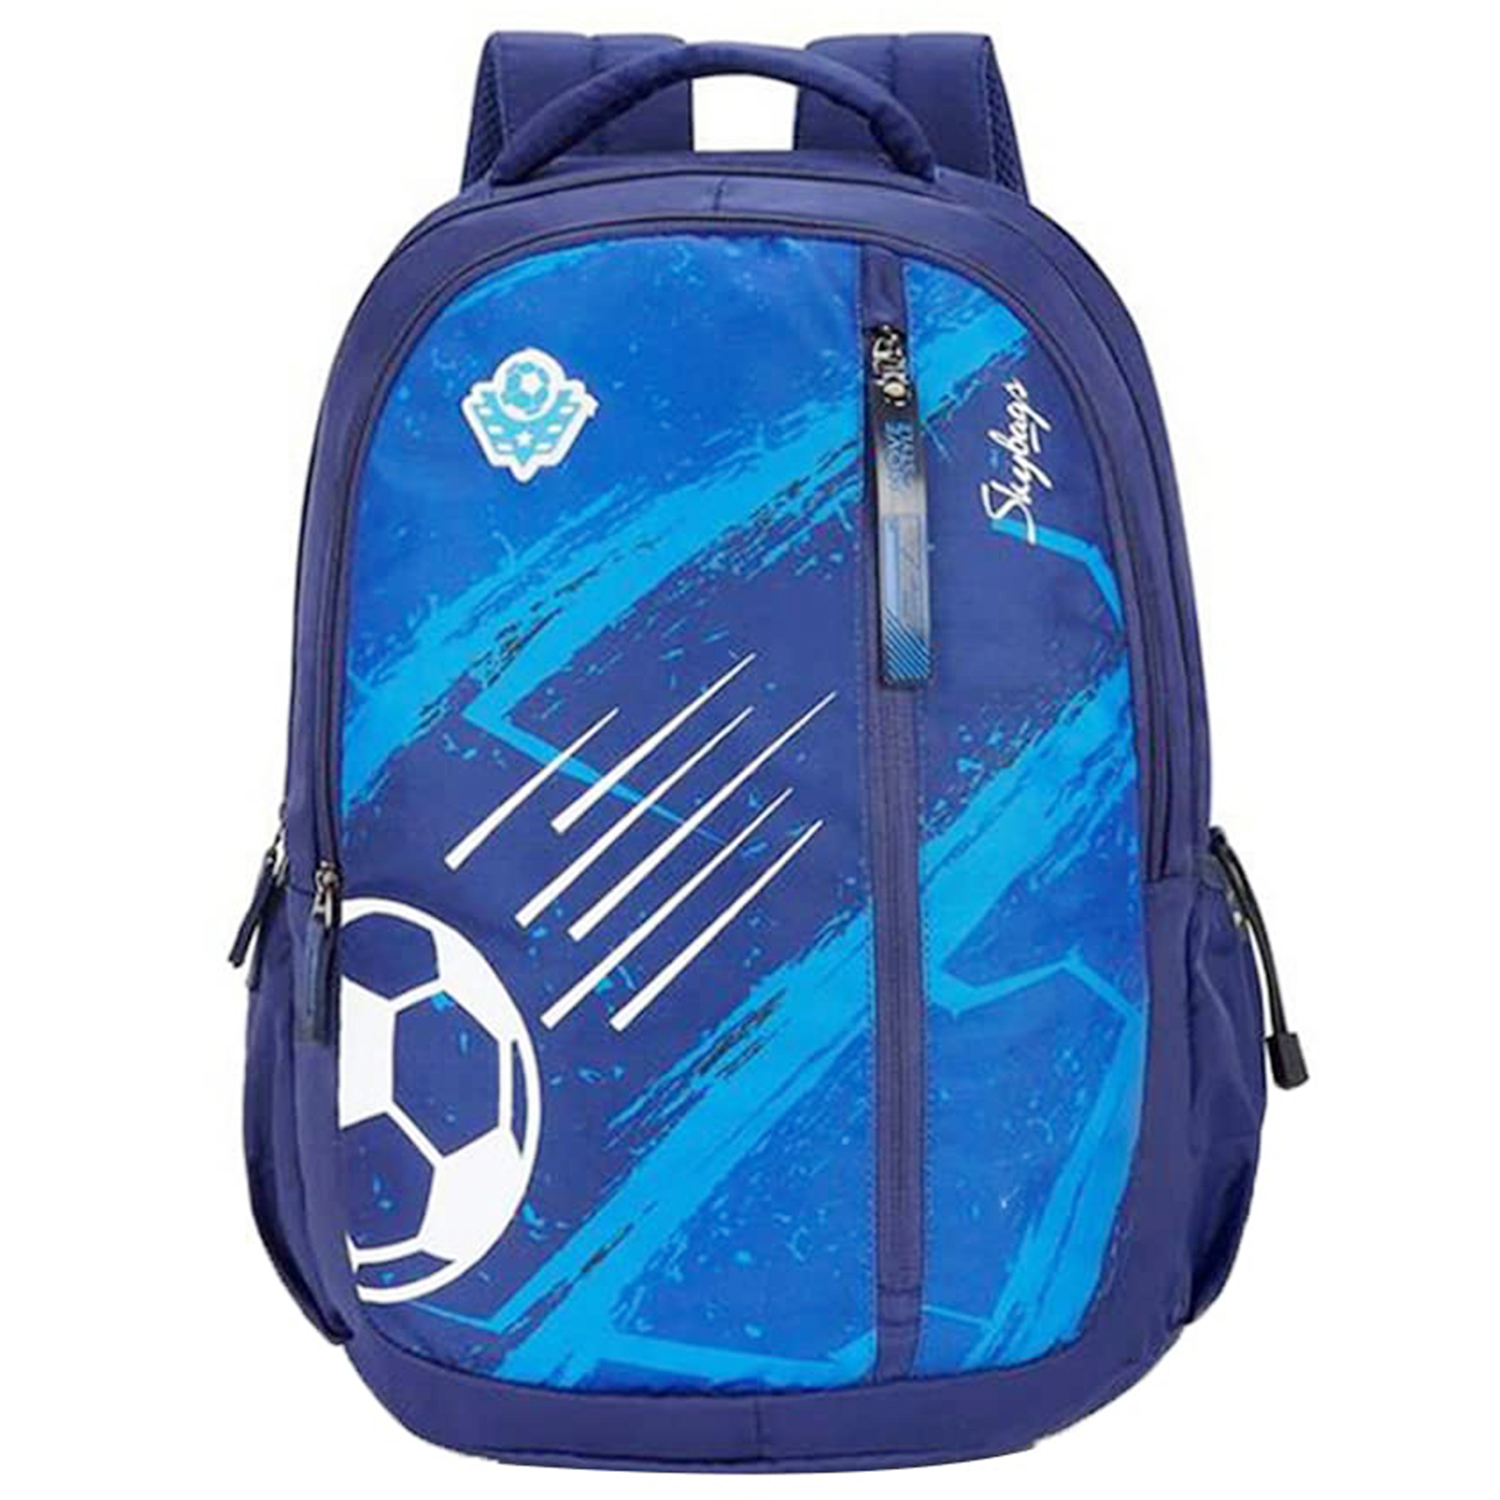 RoshanBags_SKYBAGS 32L DRIP 02 CASUAL BACKPACK BLUE